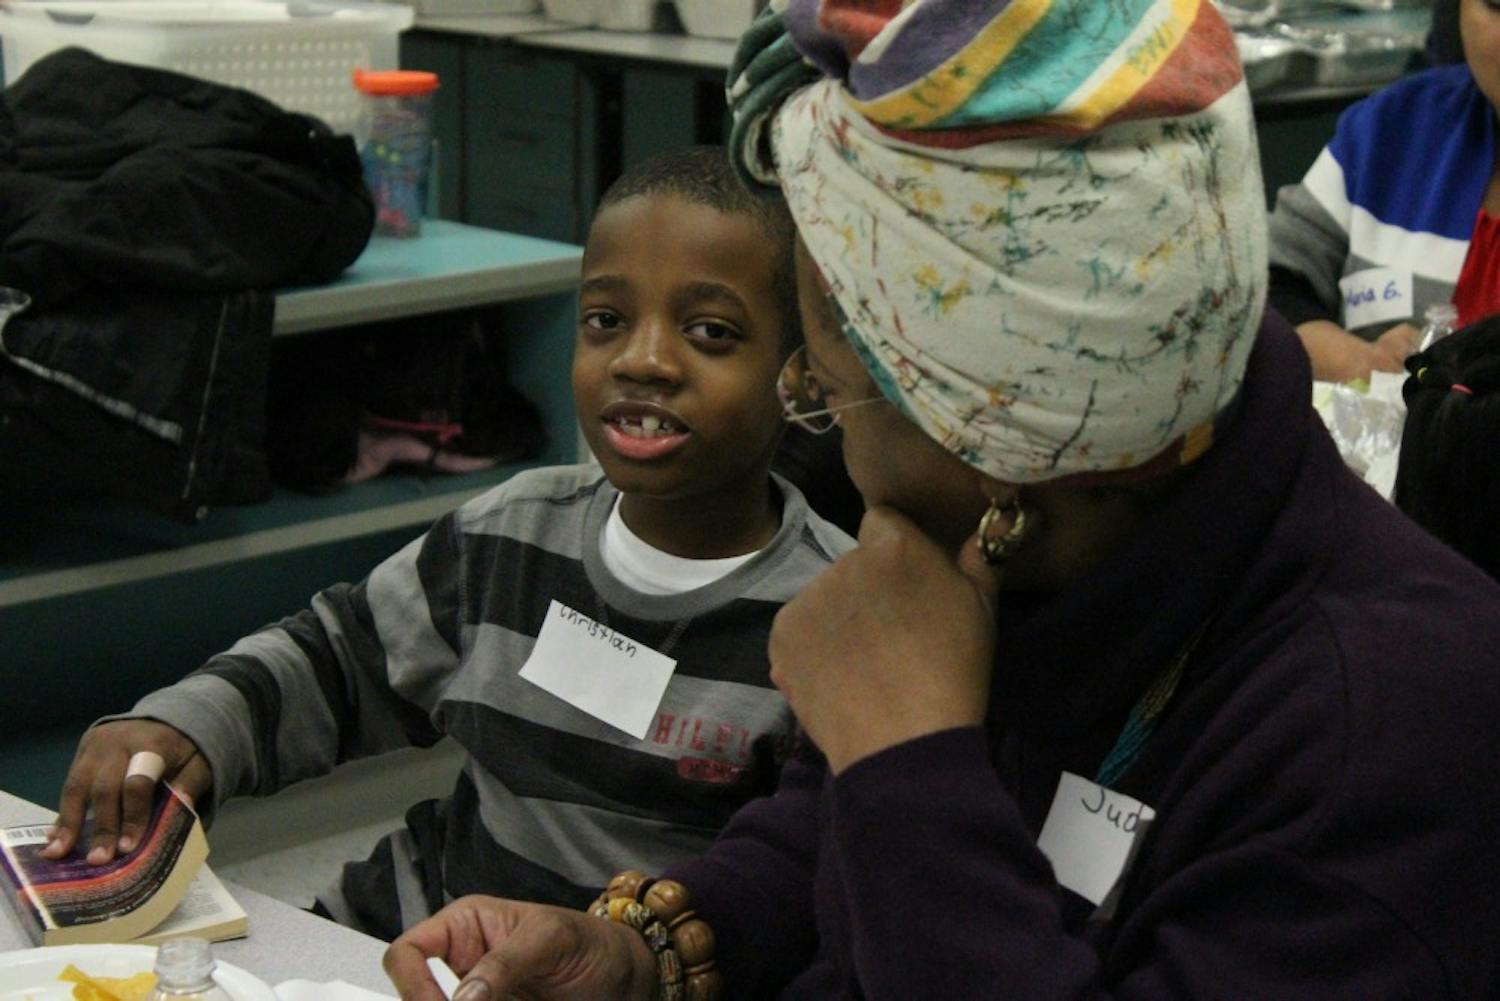 Christian and his mom talk get ready to read during McDougle Elementary School's first Family Reading Partners program event.